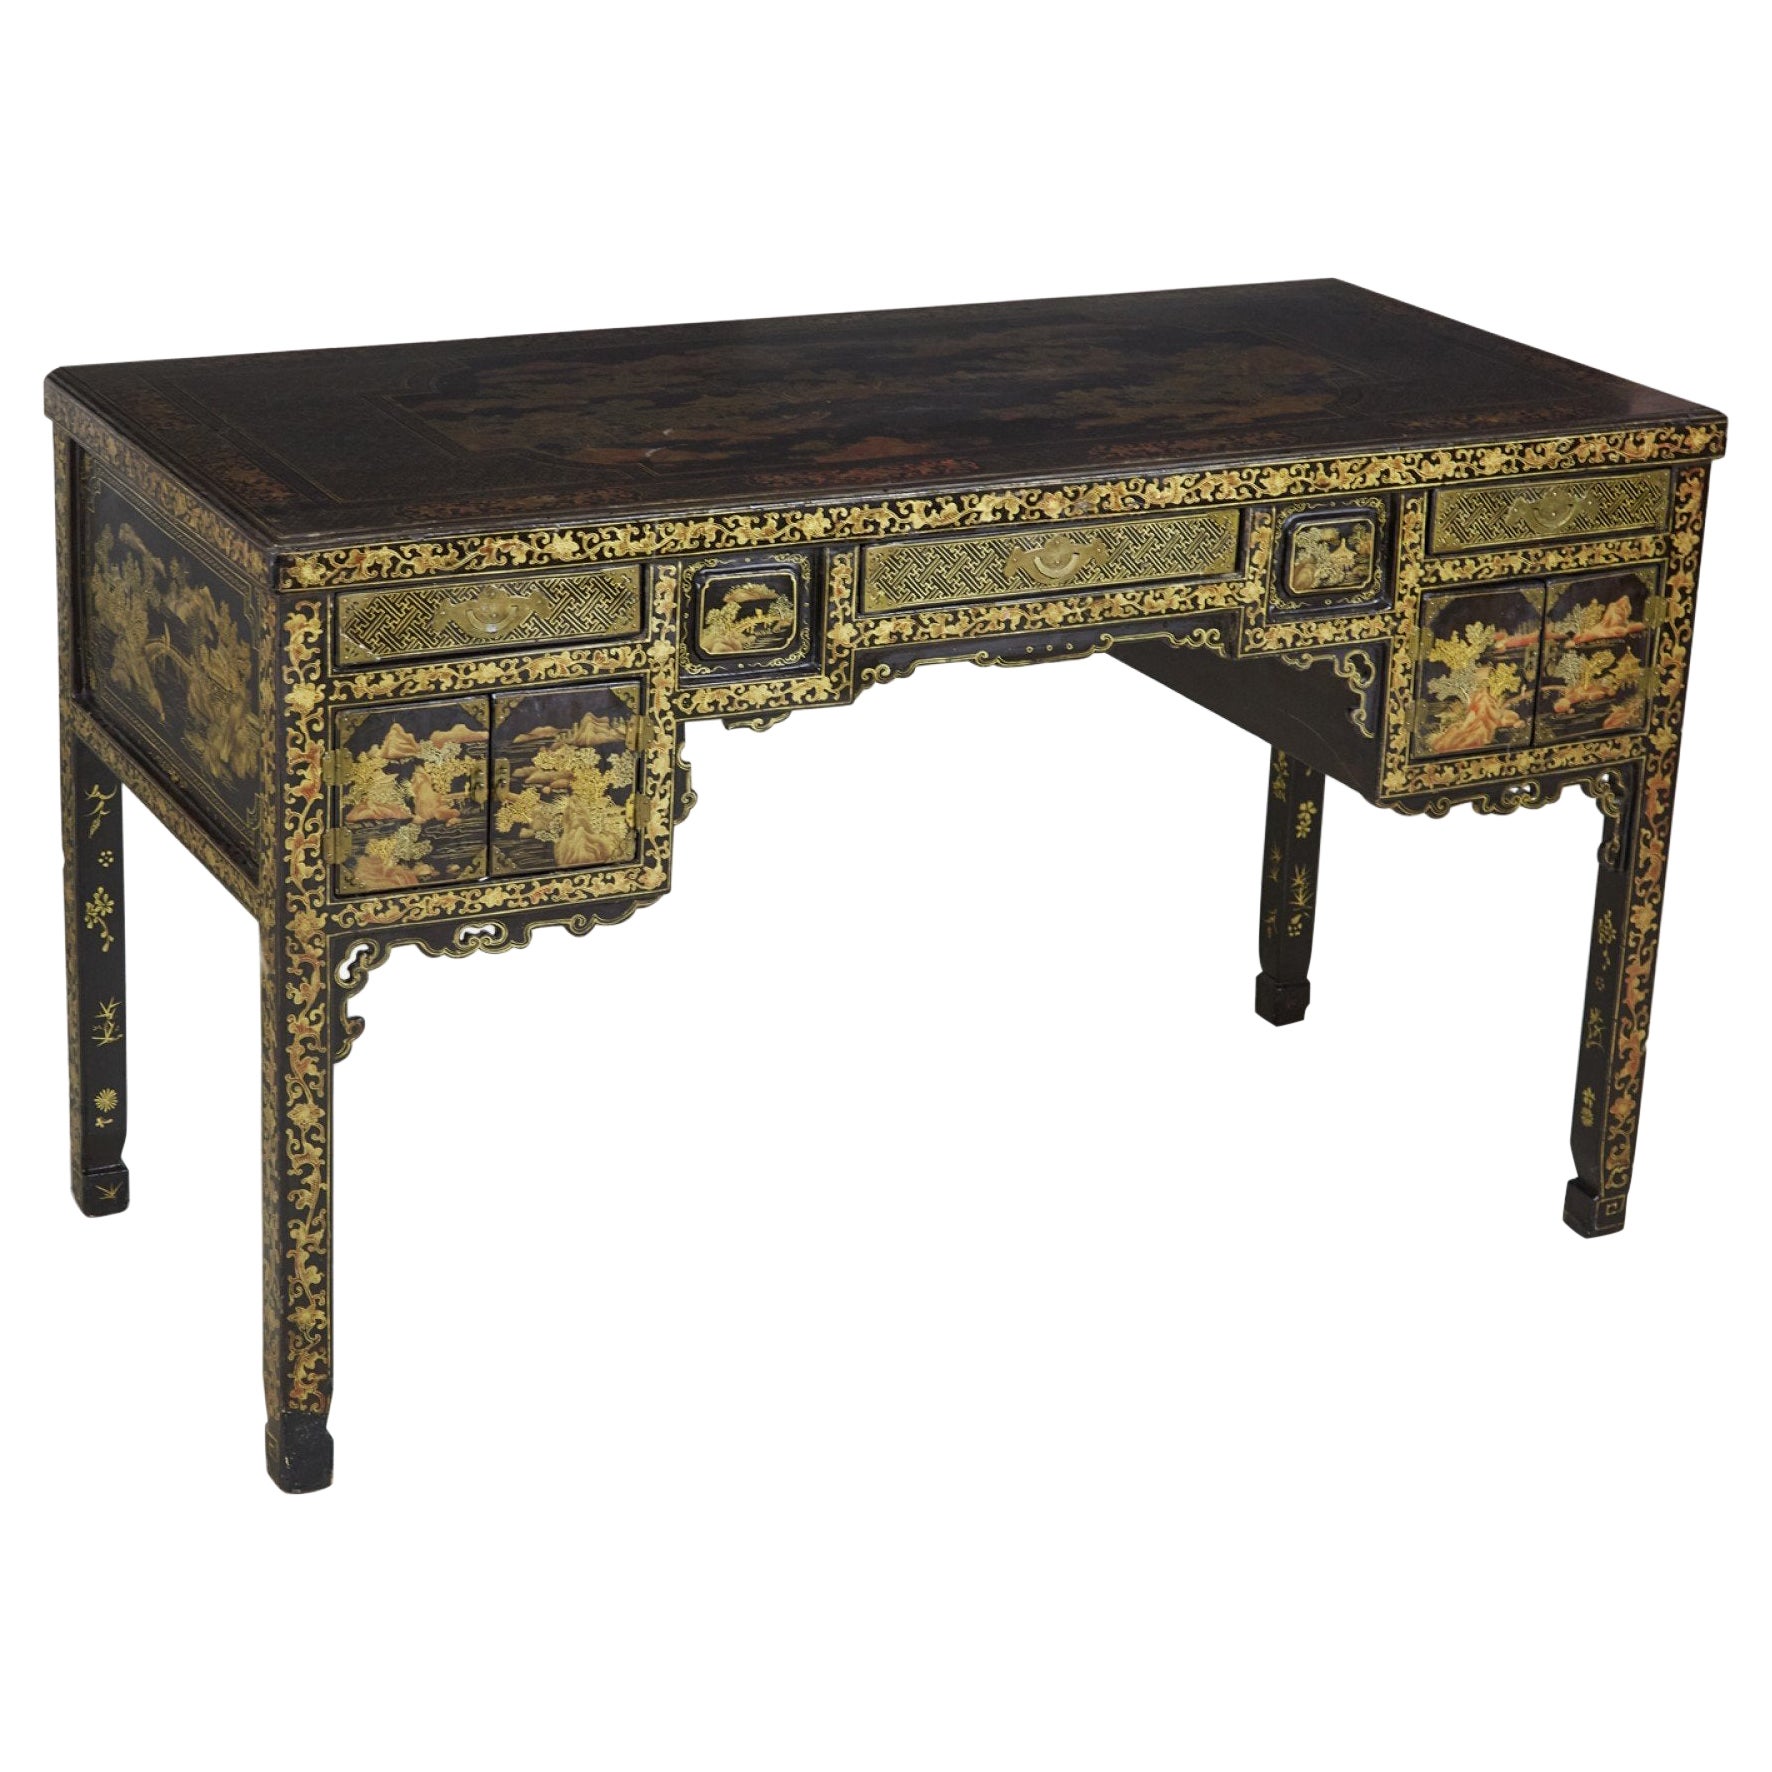 19th Century English Regency Chinese Export Gilt Black Lacquer Desk For Sale